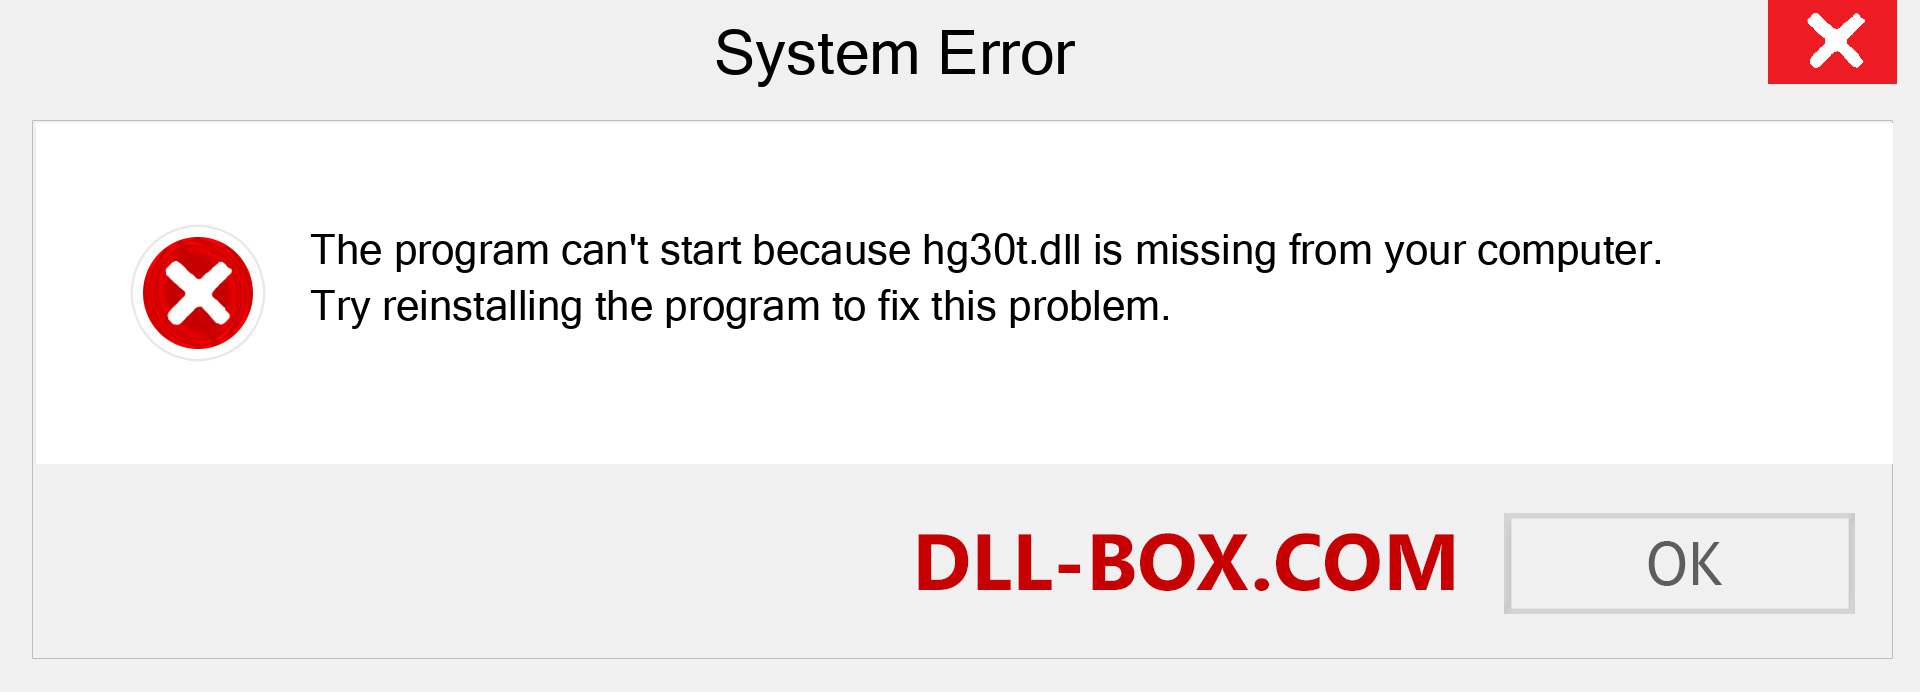  hg30t.dll file is missing?. Download for Windows 7, 8, 10 - Fix  hg30t dll Missing Error on Windows, photos, images